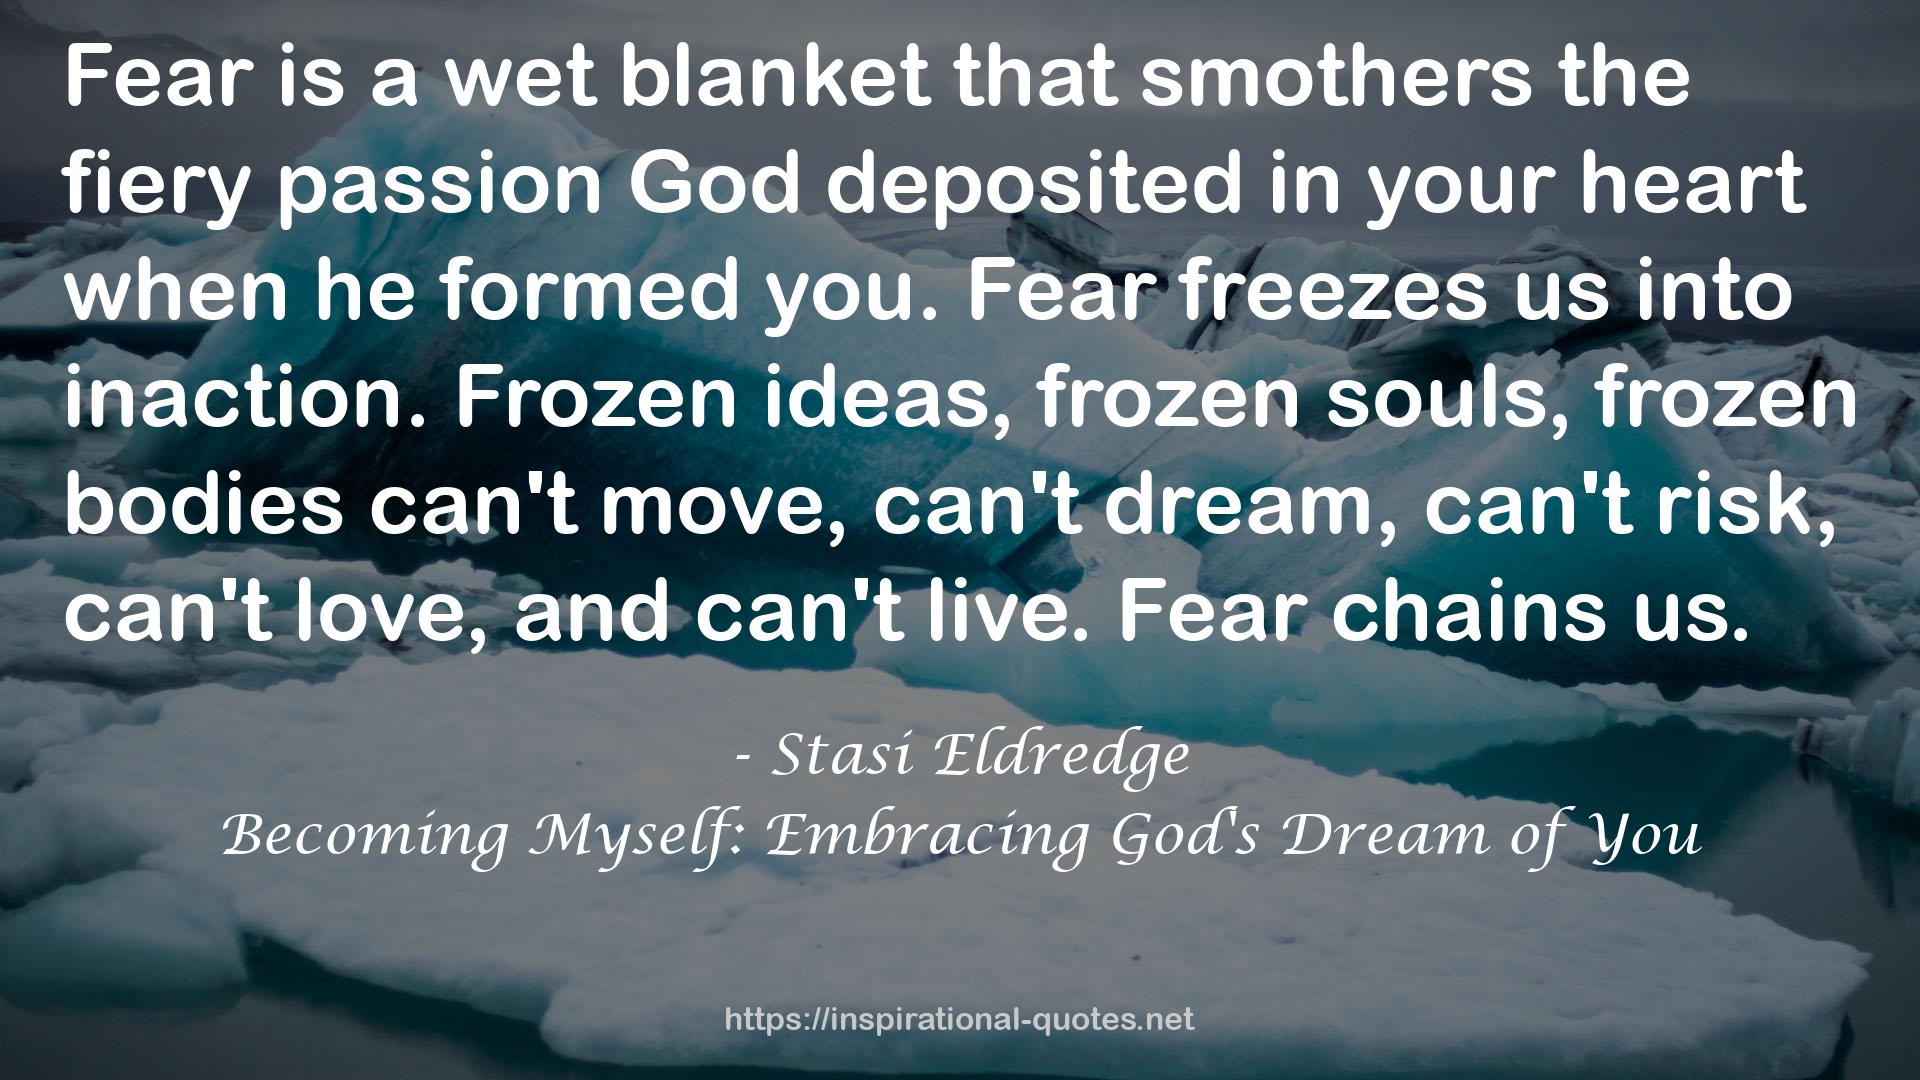 Becoming Myself: Embracing God's Dream of You QUOTES